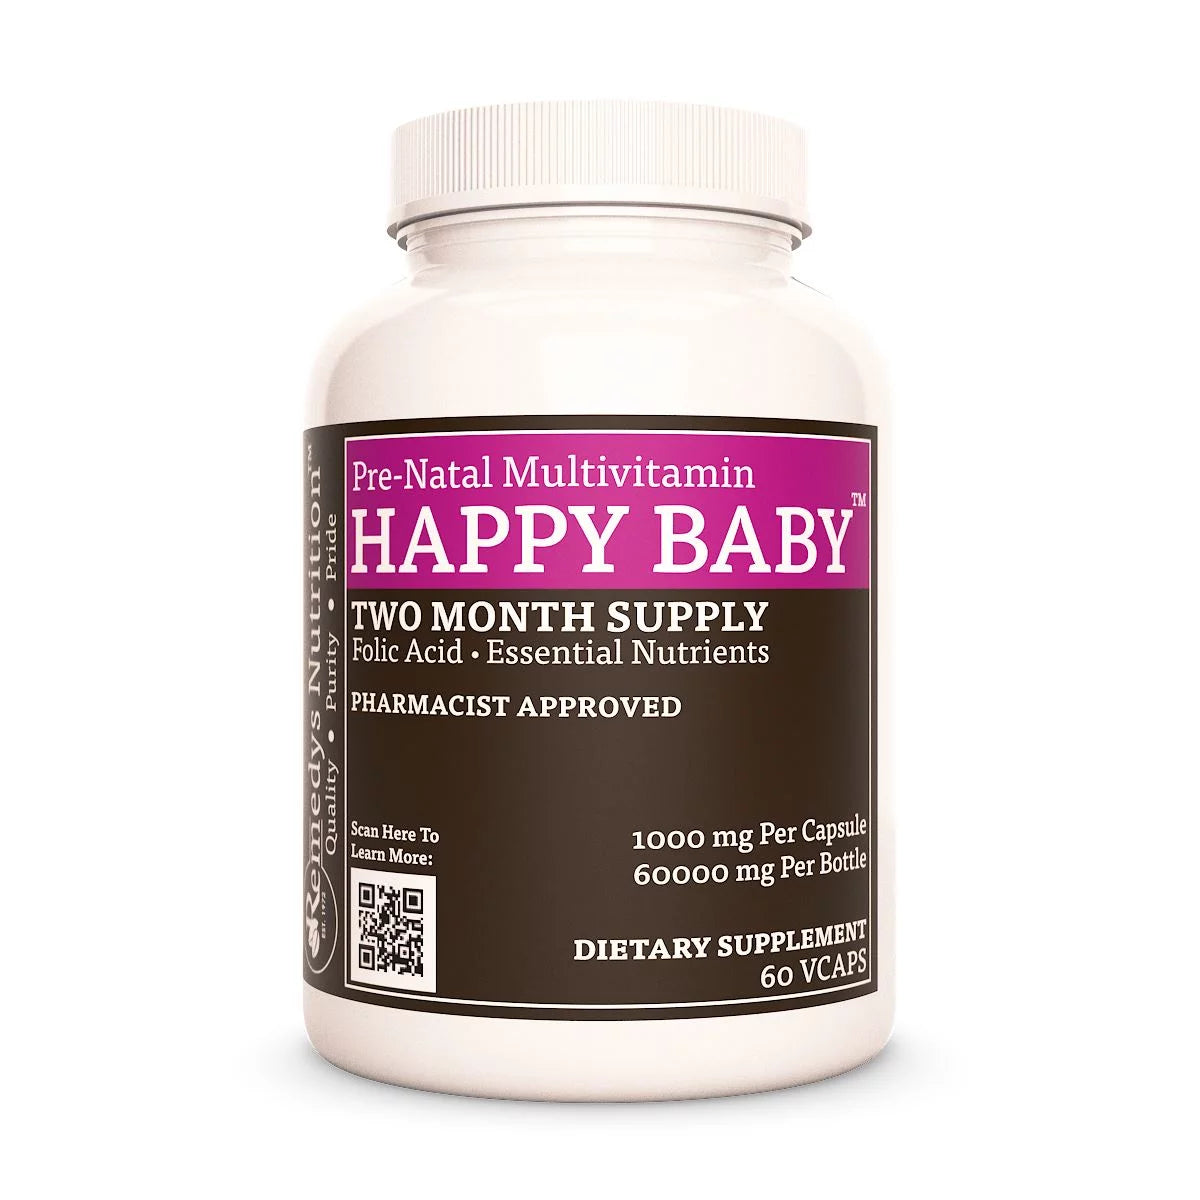 Image of Remedy's Nutrition® Happy Baby™ Mothers' Prenatal Multivitamin Capsules Dietary Supplement front bottle. Made in USA.